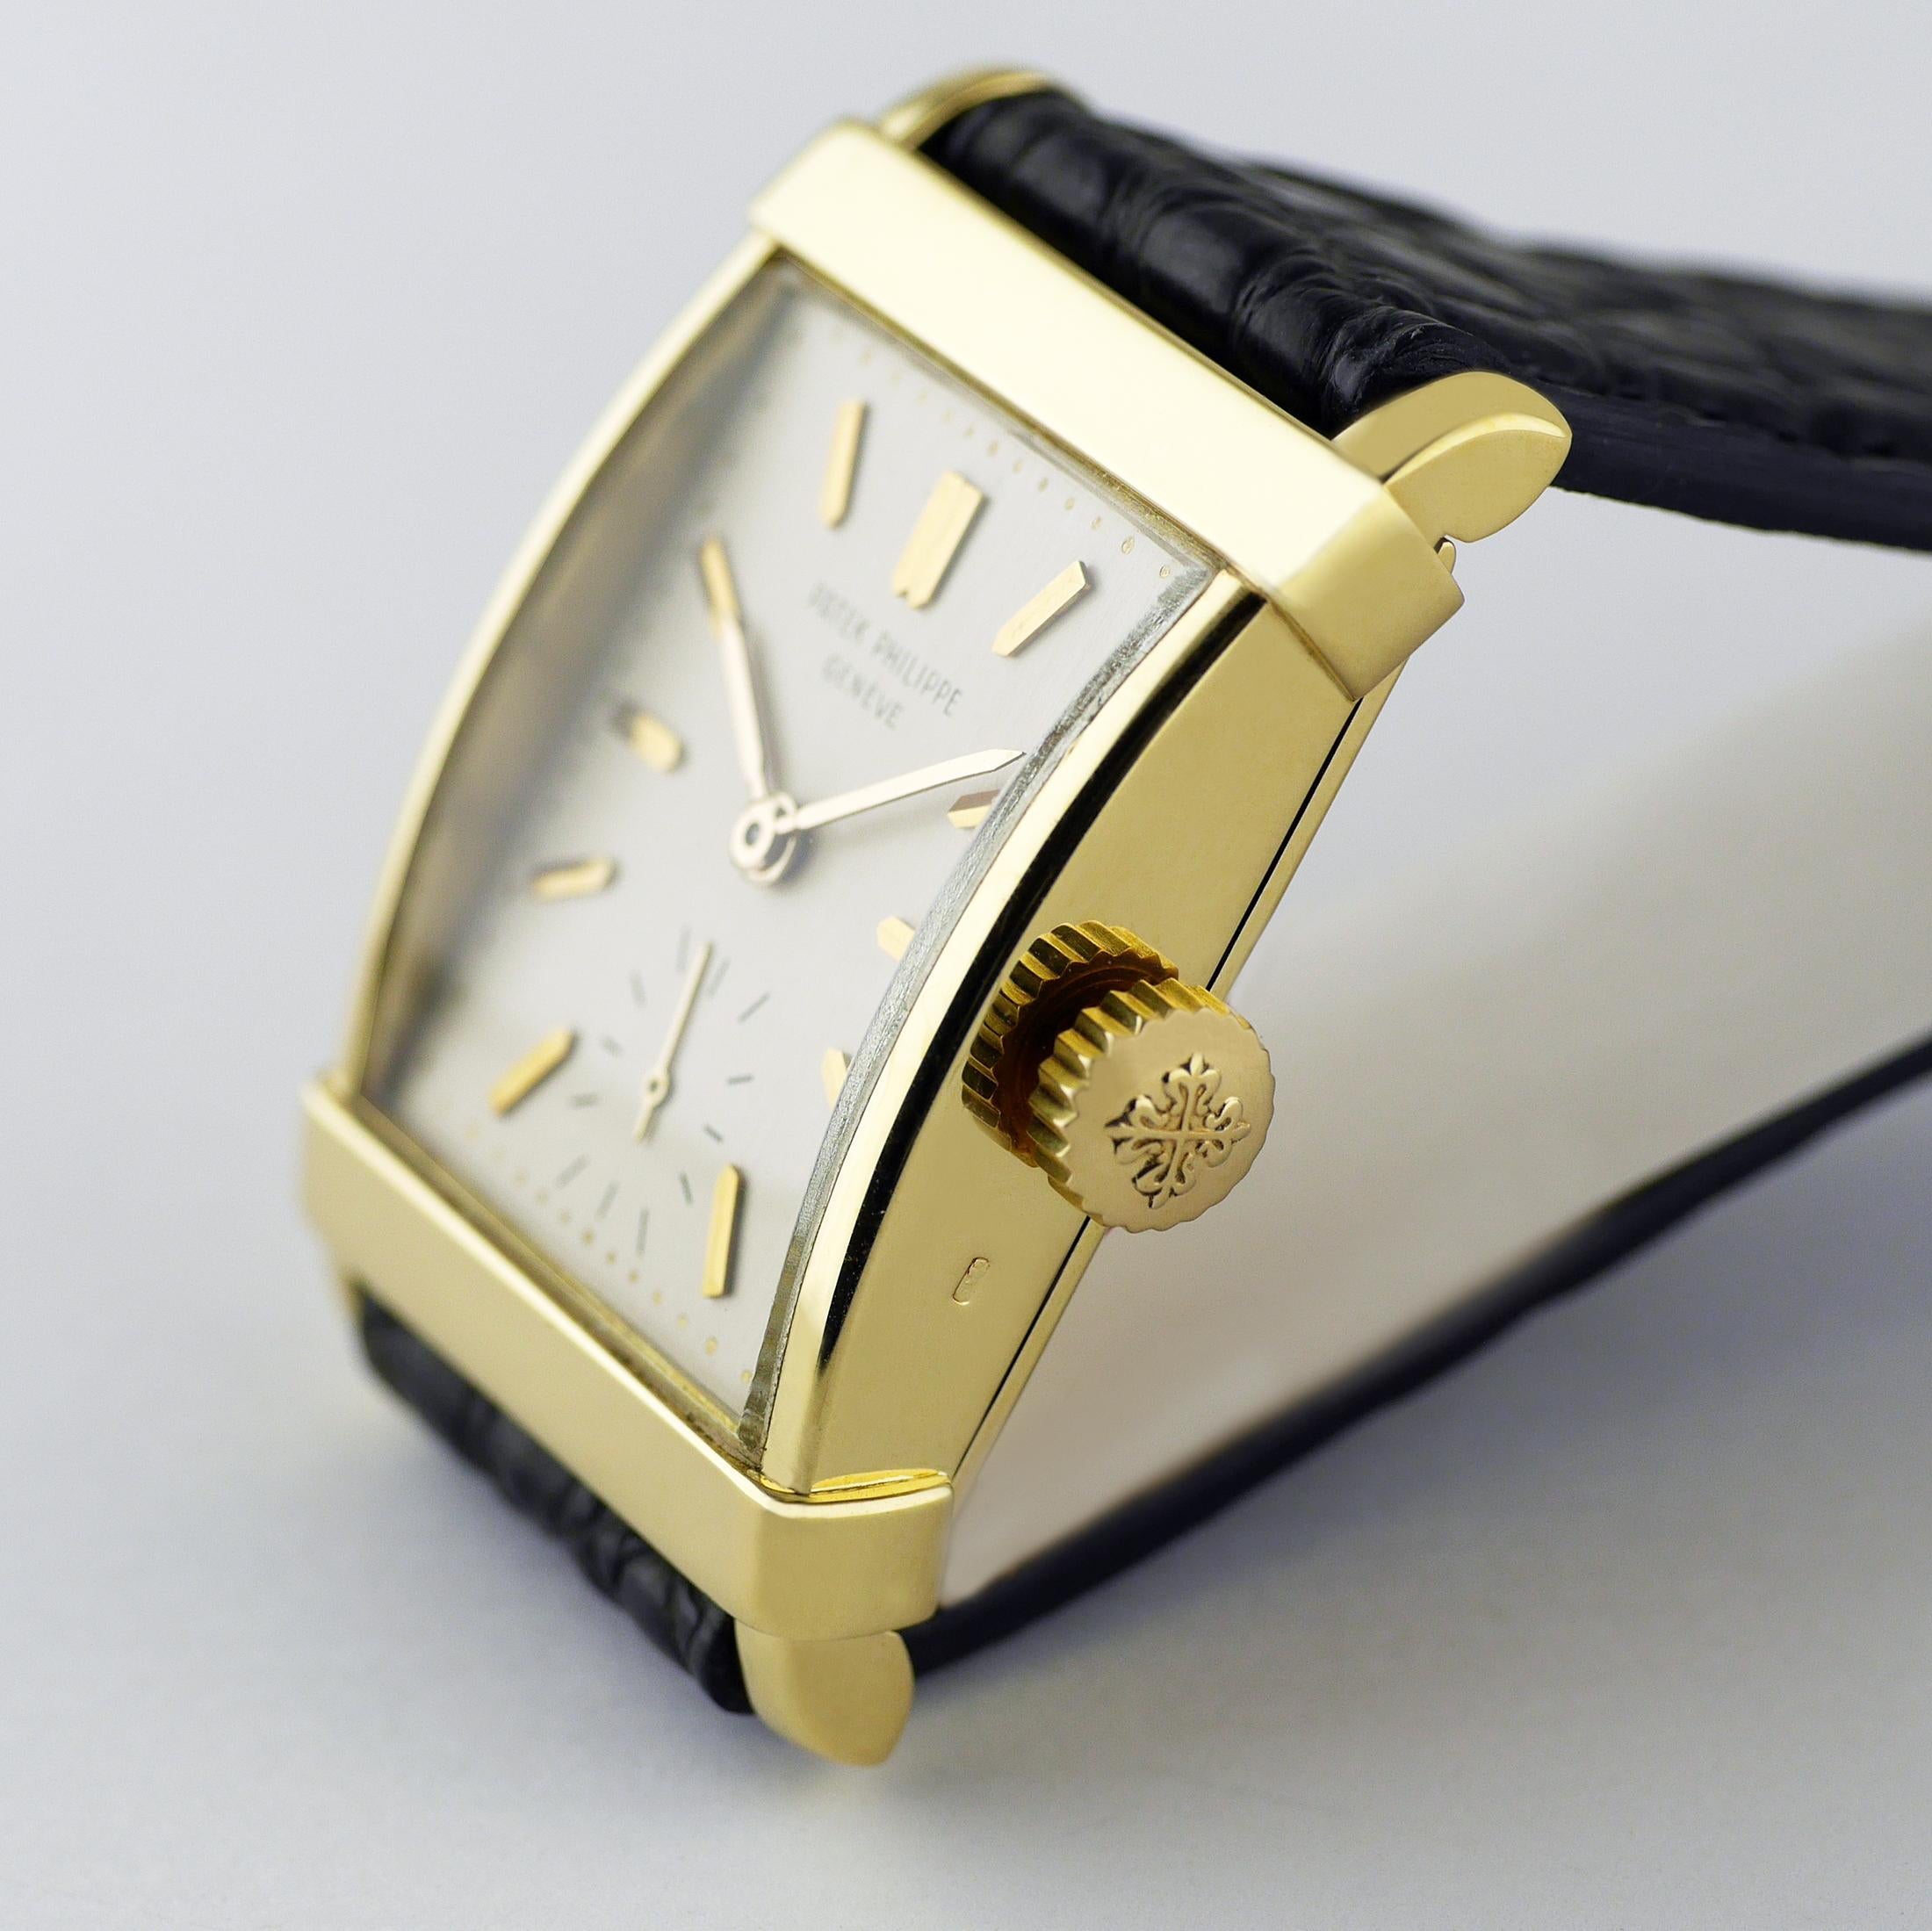 Women's or Men's Patek Philippe Gold Wrist Watch Dated 1964 For Sale